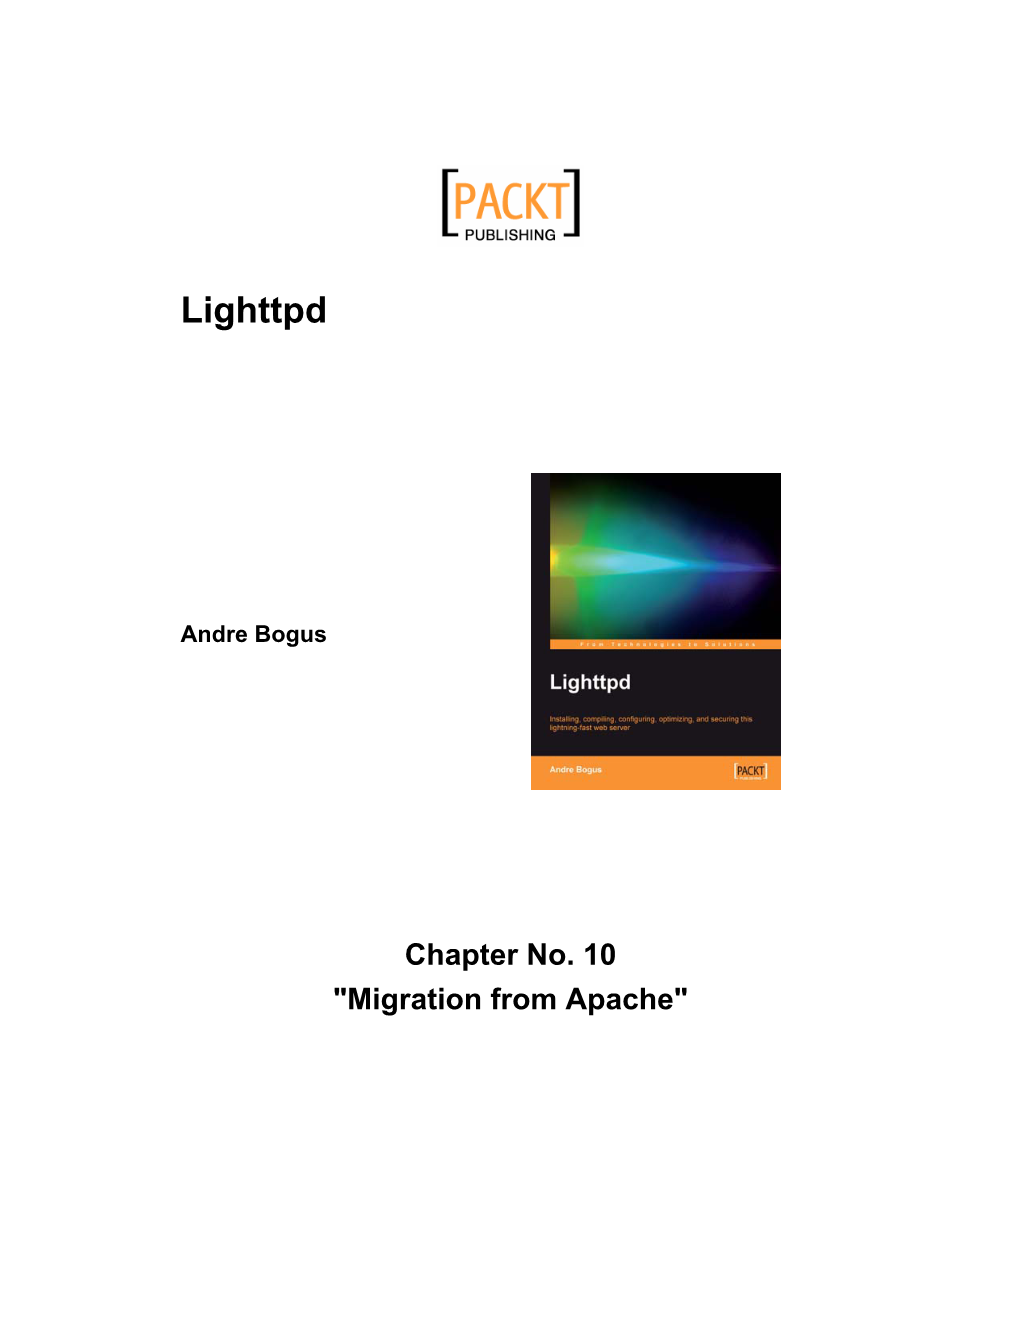 Chapter 10 Migrating from Apache